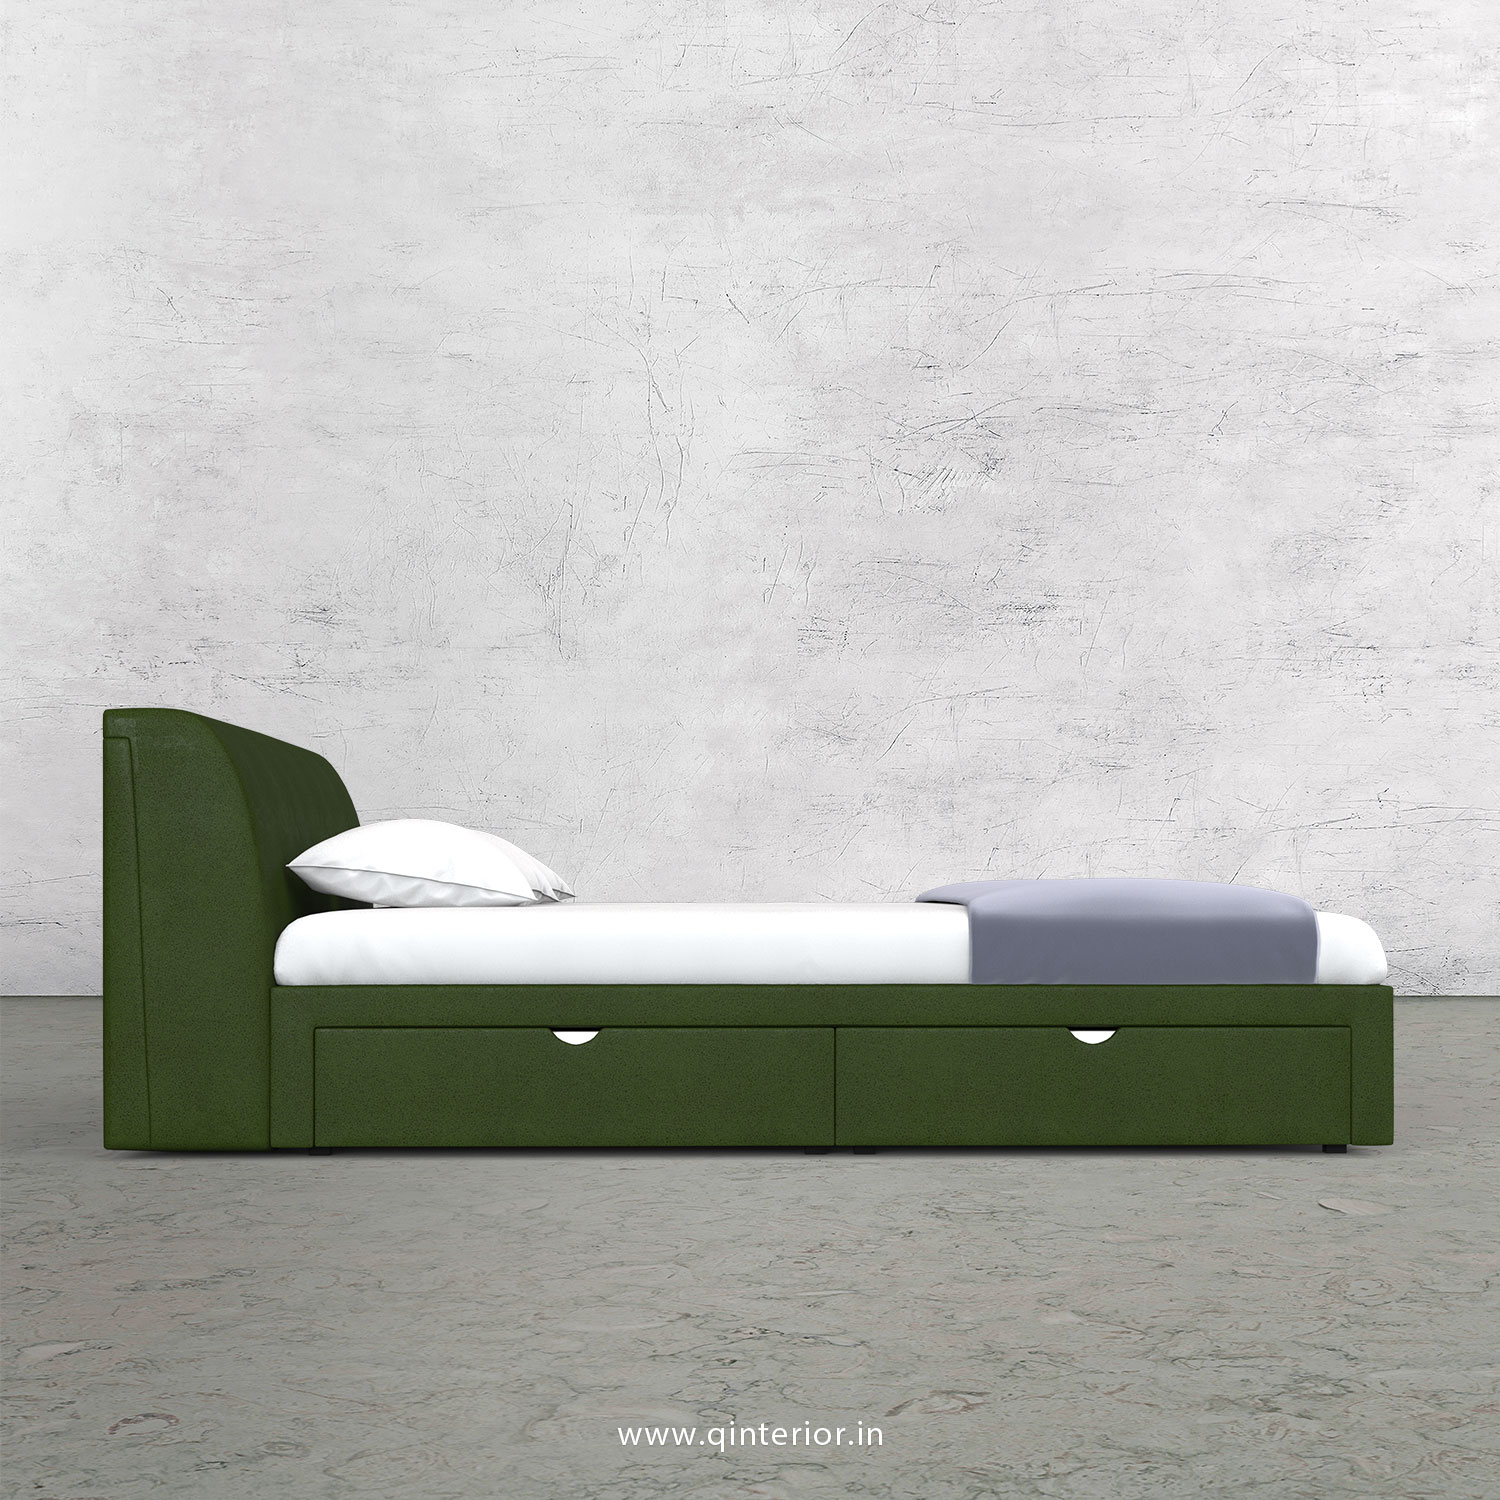 Luxura Queen Storage Bed in Fab Leather Fabric - QBD007 FL04